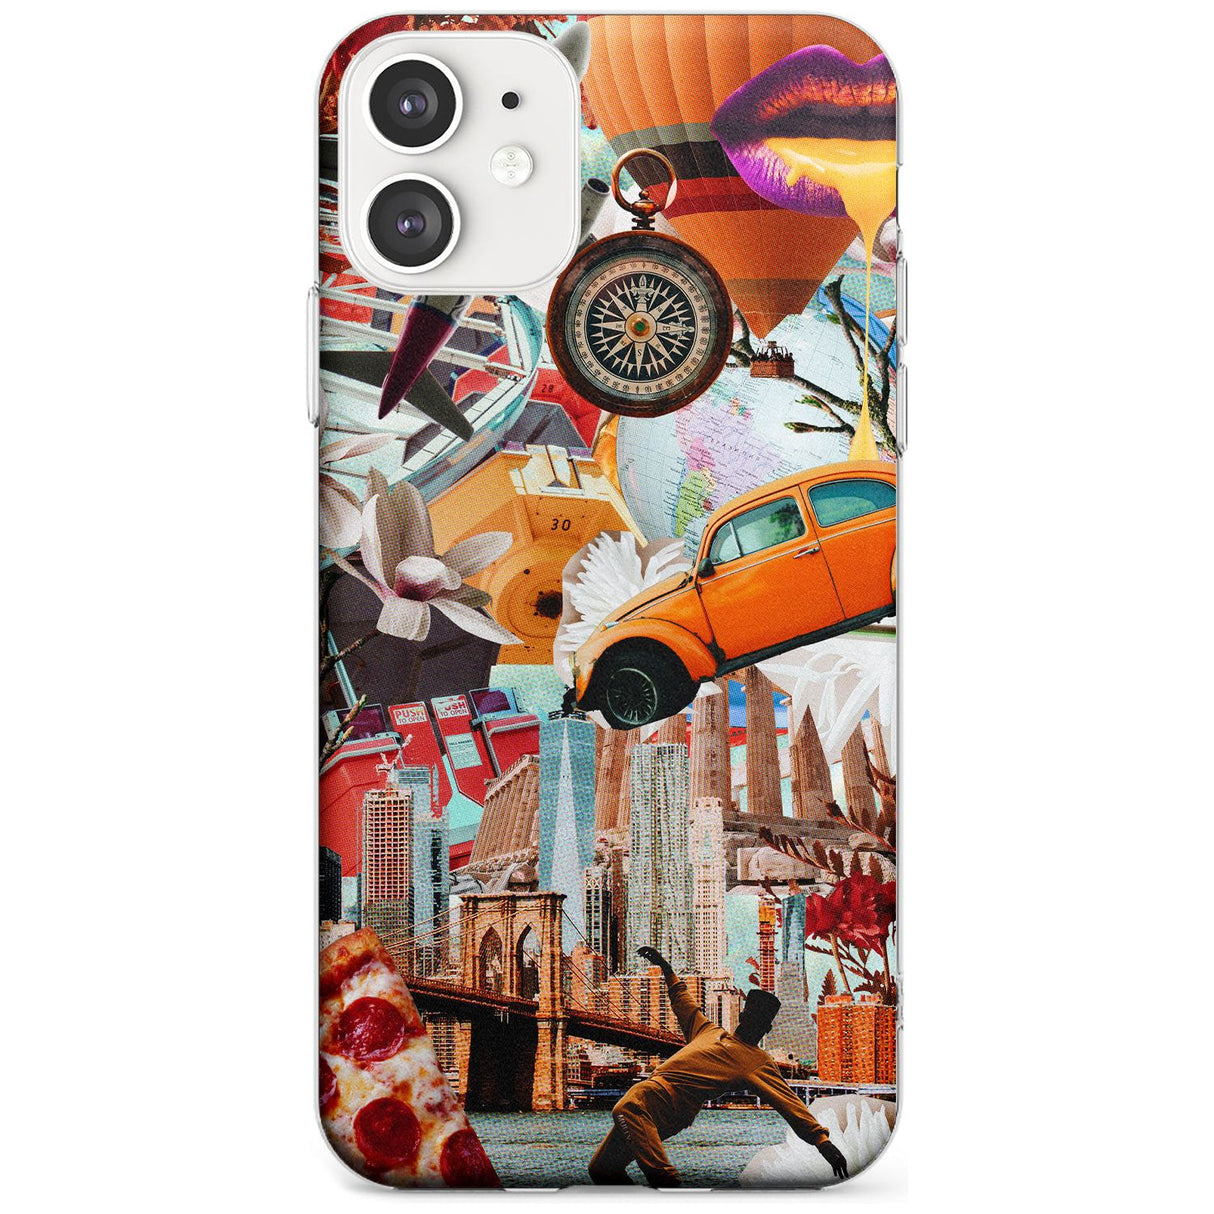 Vintage Collage: New York Mix Slim TPU Phone Case for iPhone 11